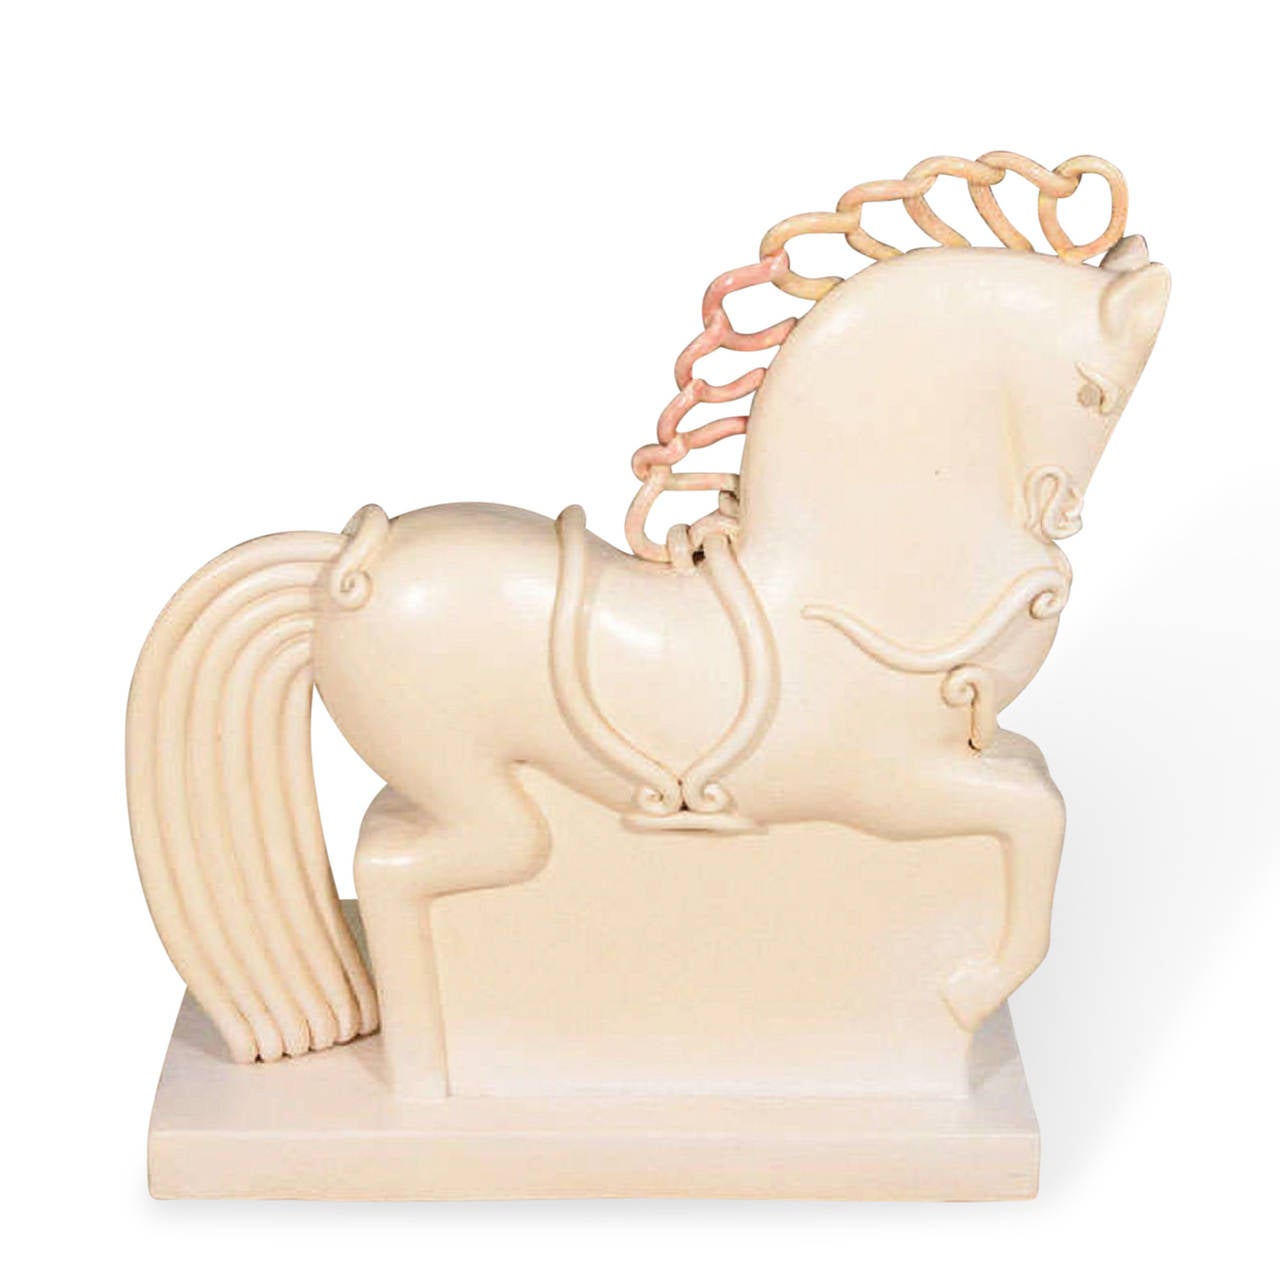 Ceramic Horse by Colette Gueden for Primavera, French 1930s 2